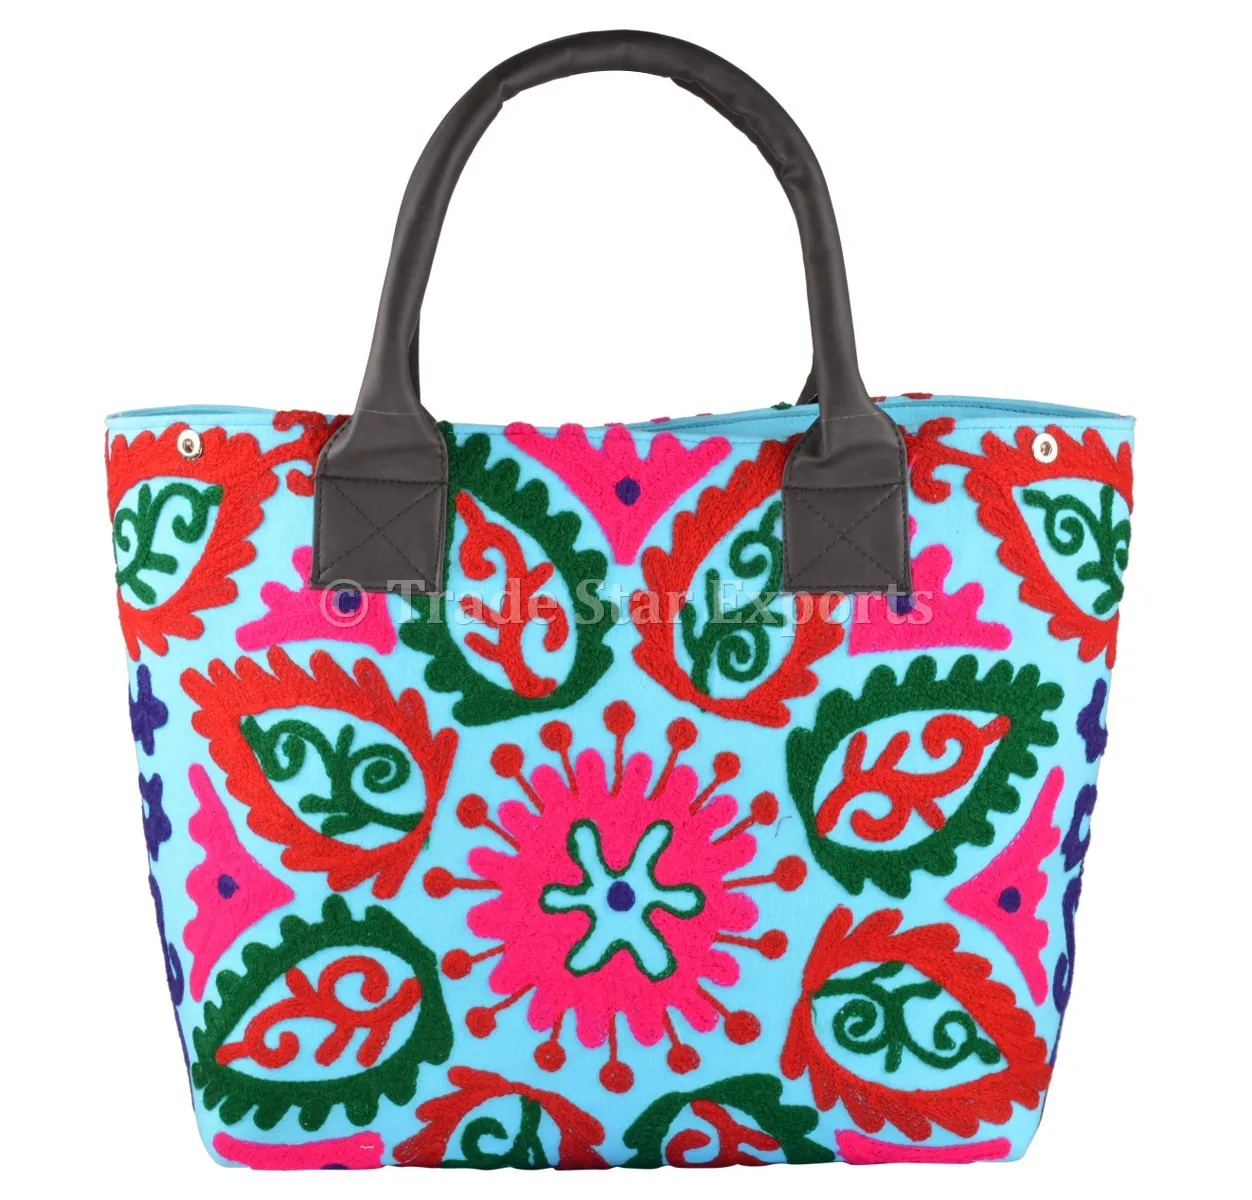 Indian Cotton Turquoise Shoulder Women Boho Bag Suzani Embroidery Tote Hand Bag 